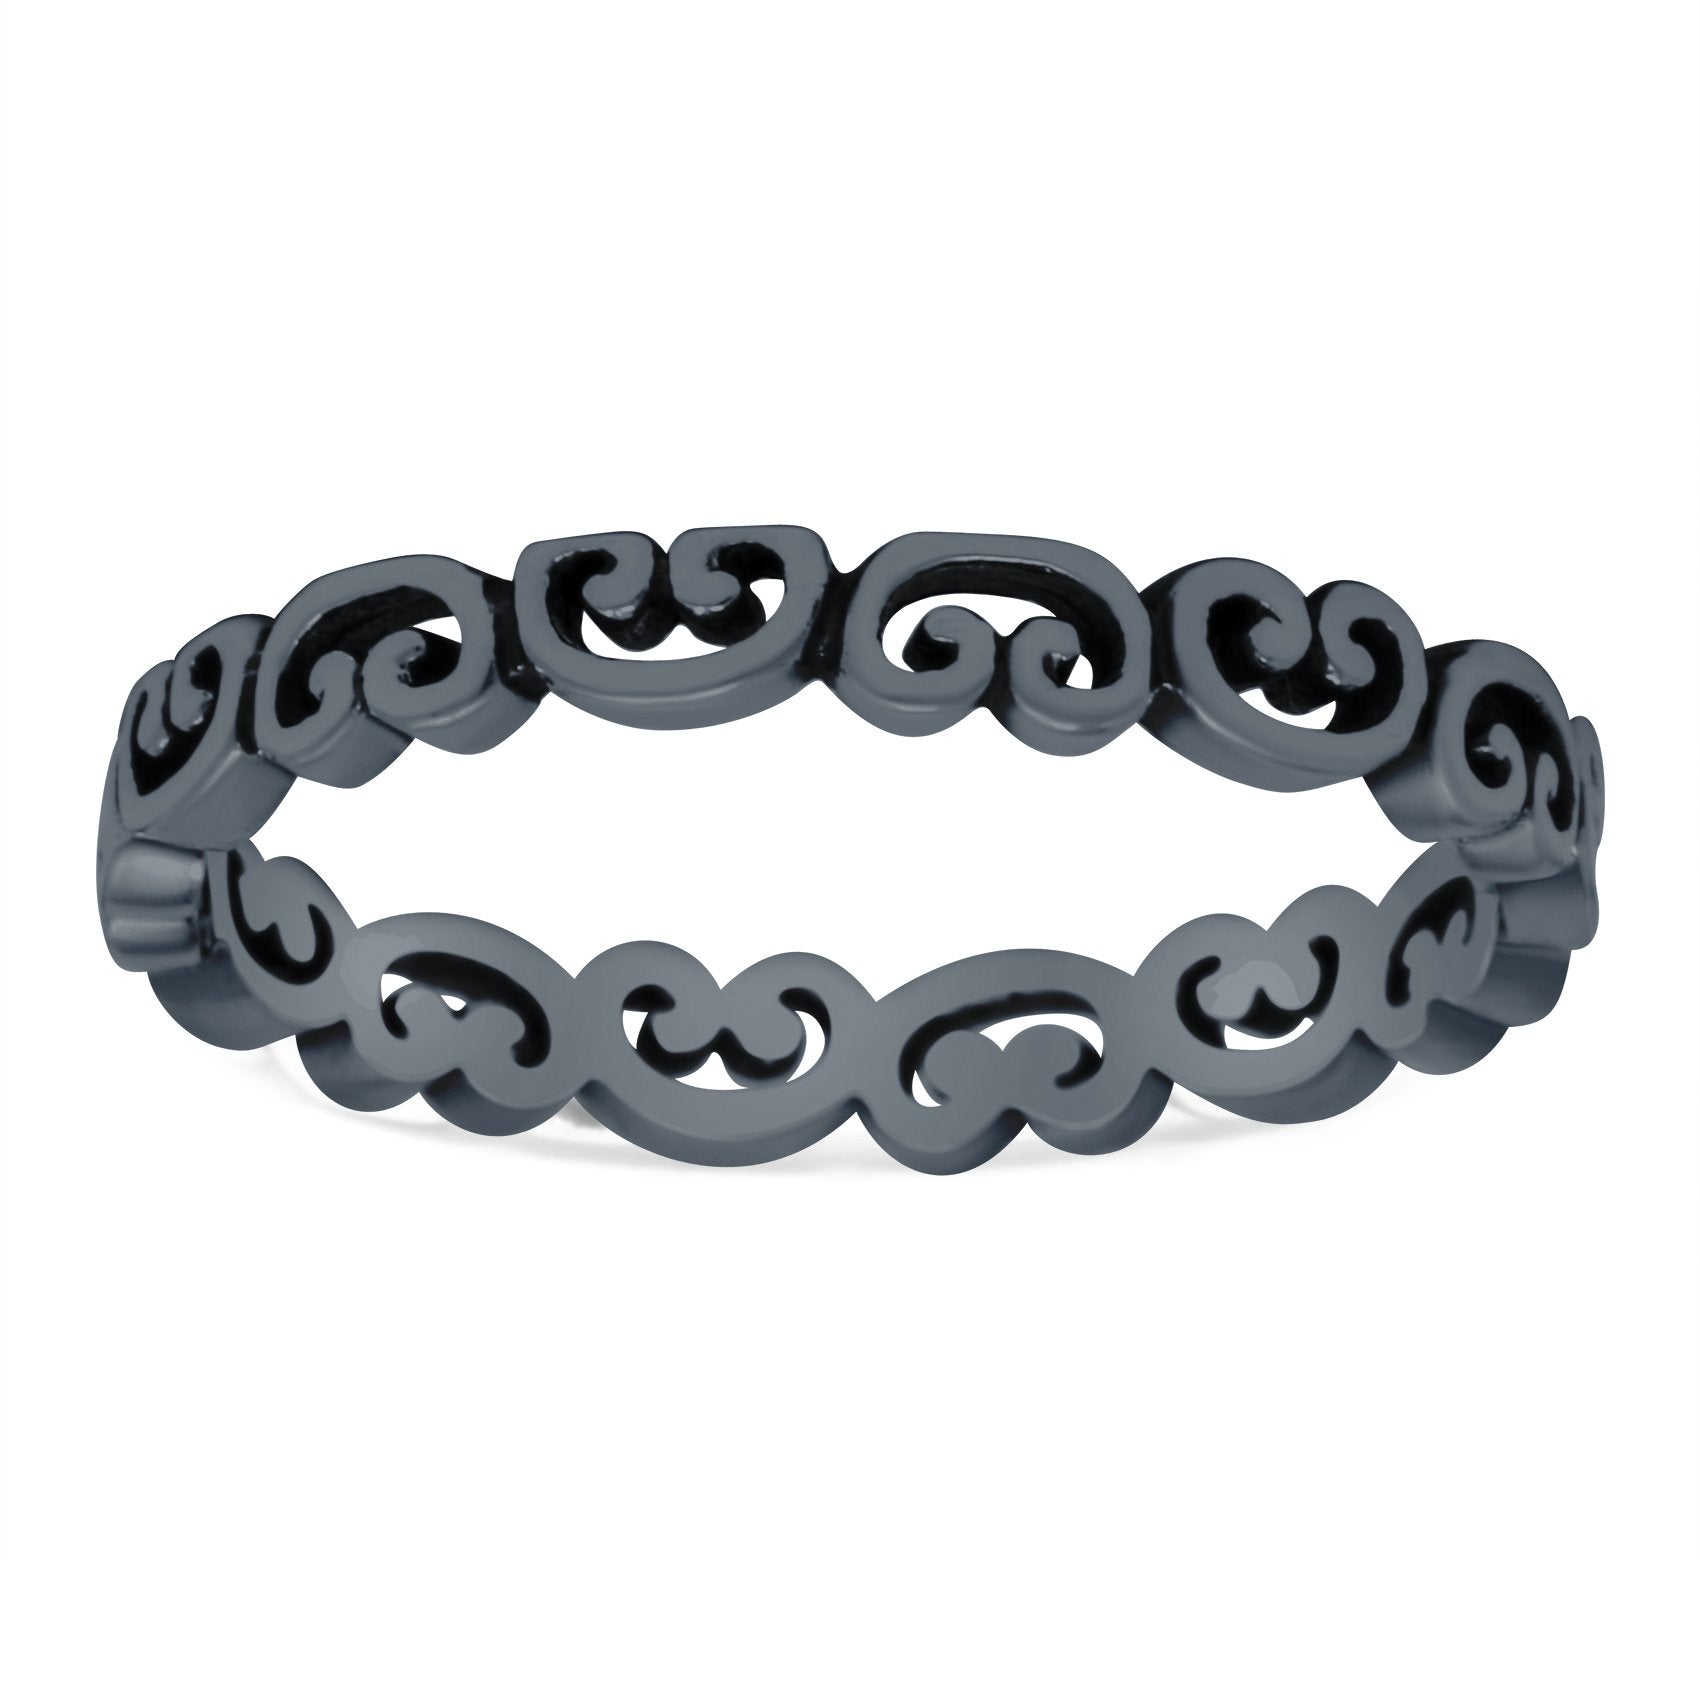 Heart Filigree Band Oxidized Ring Solid 925 Sterling Silver Thumb Ring (3mm)